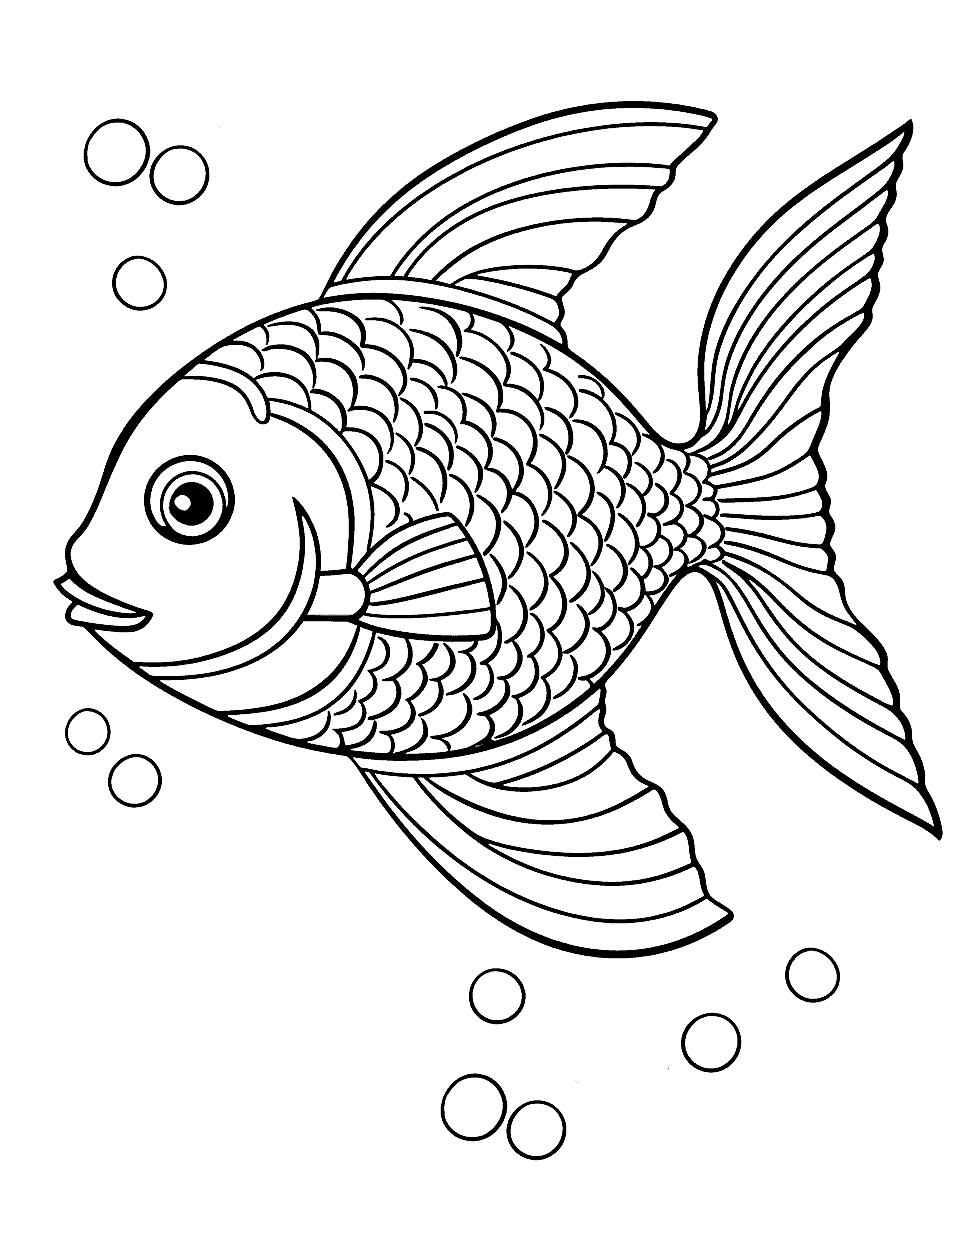 Stress Relief Fish Patterns Coloring Page - Detailed fish scales designed to provide stress relief through coloring.